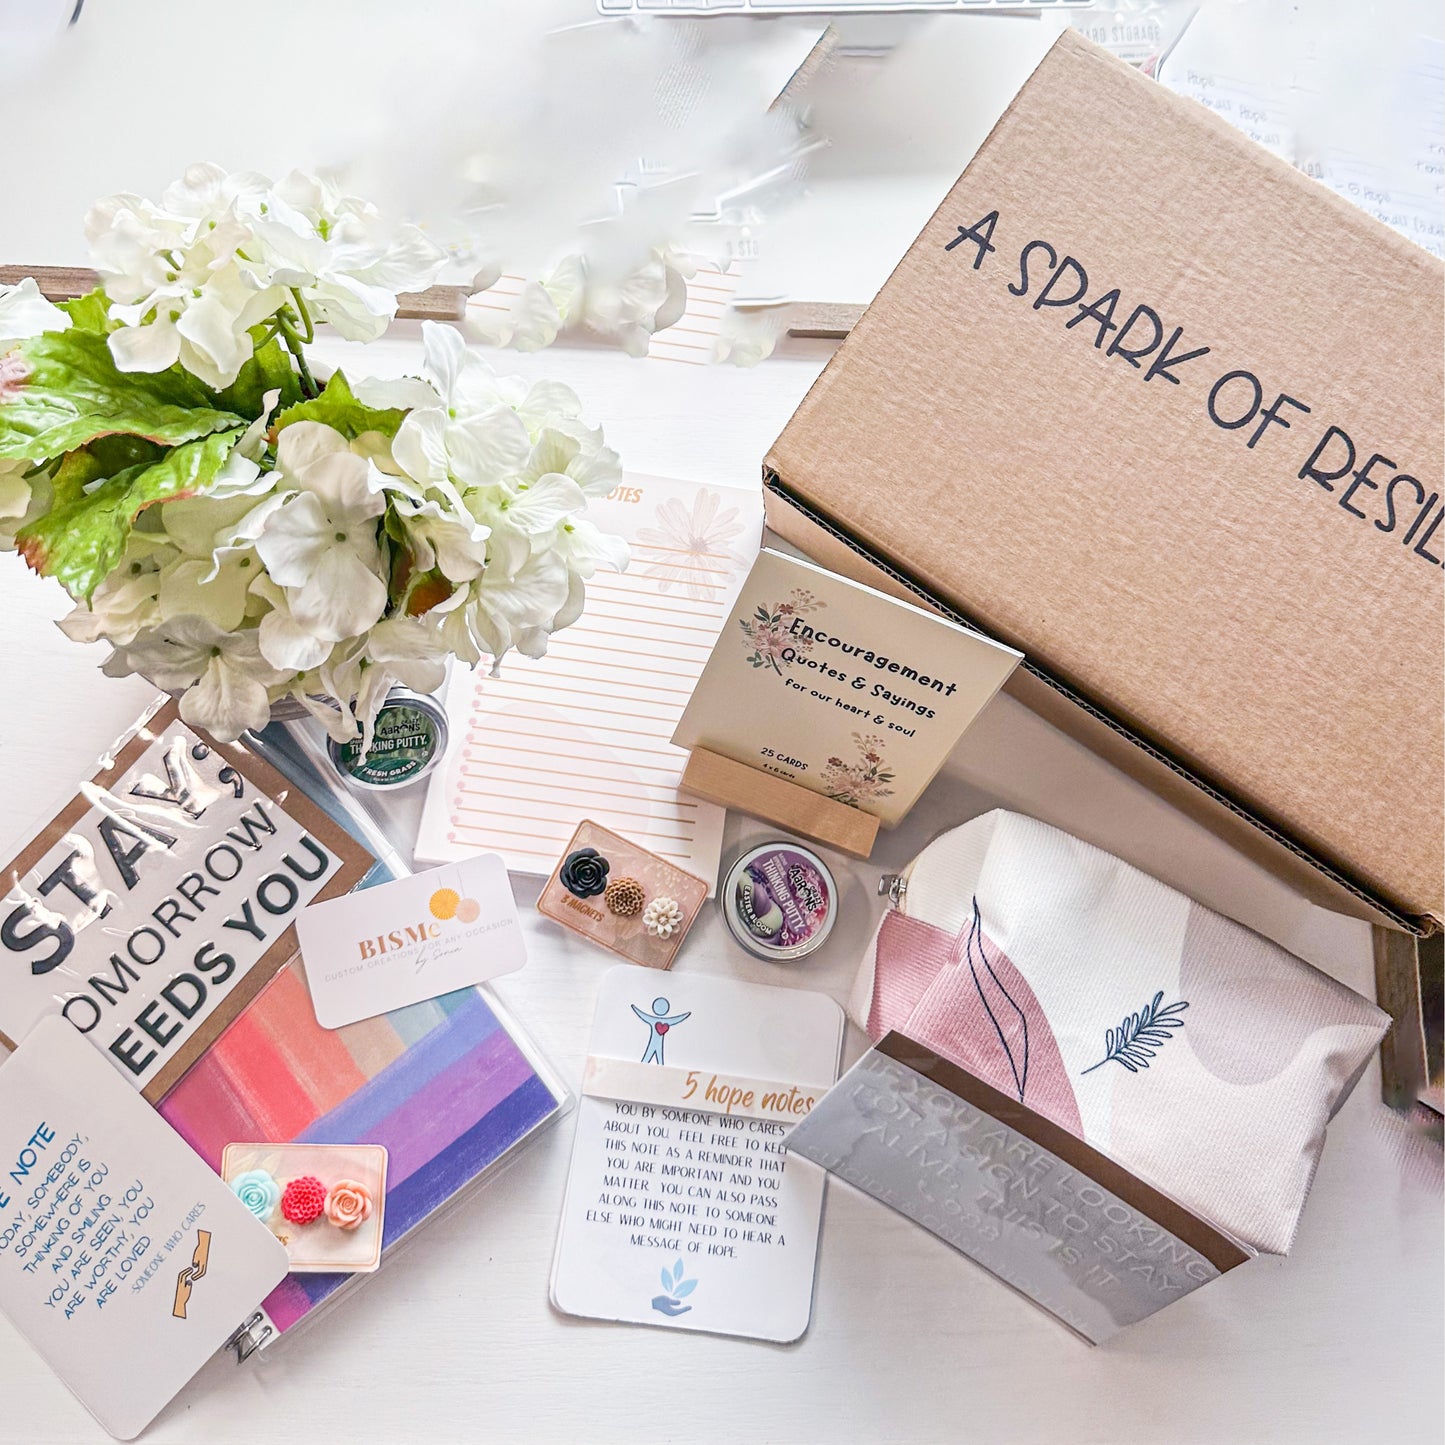 A Spark of Resilience Box